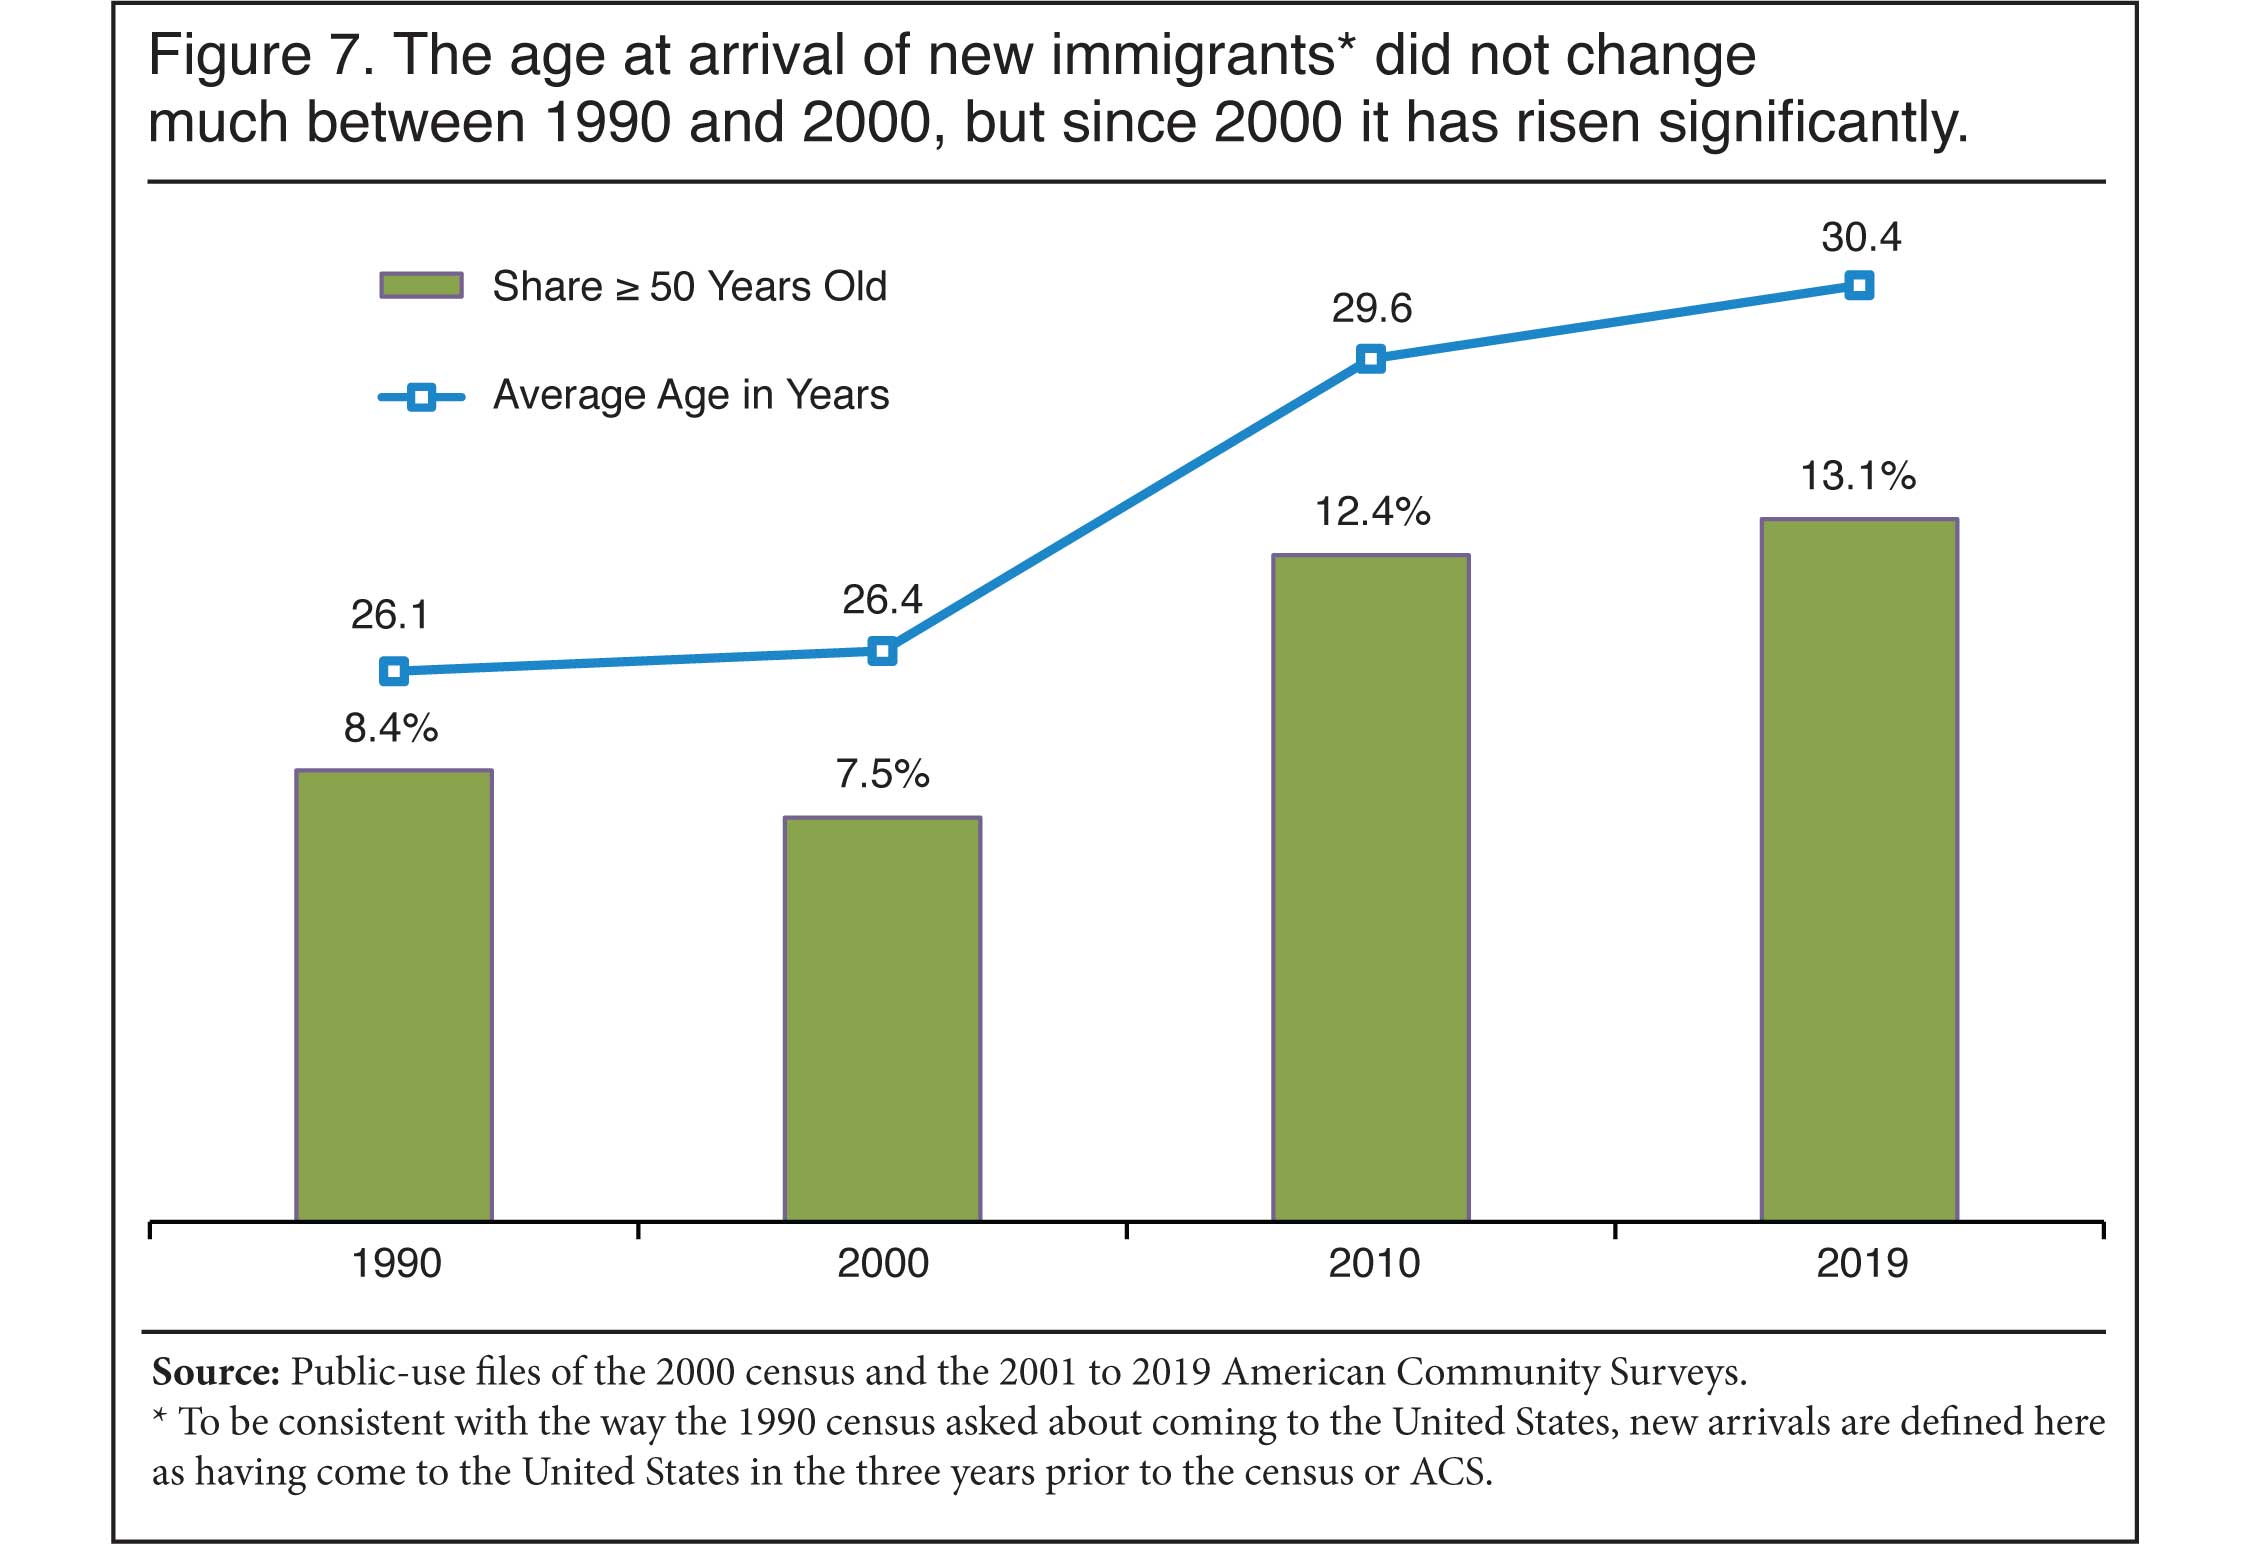 Graph: The age at arrival of new immigrants did not change much between 1990 and 2000, but since 2000 it has risen significantly